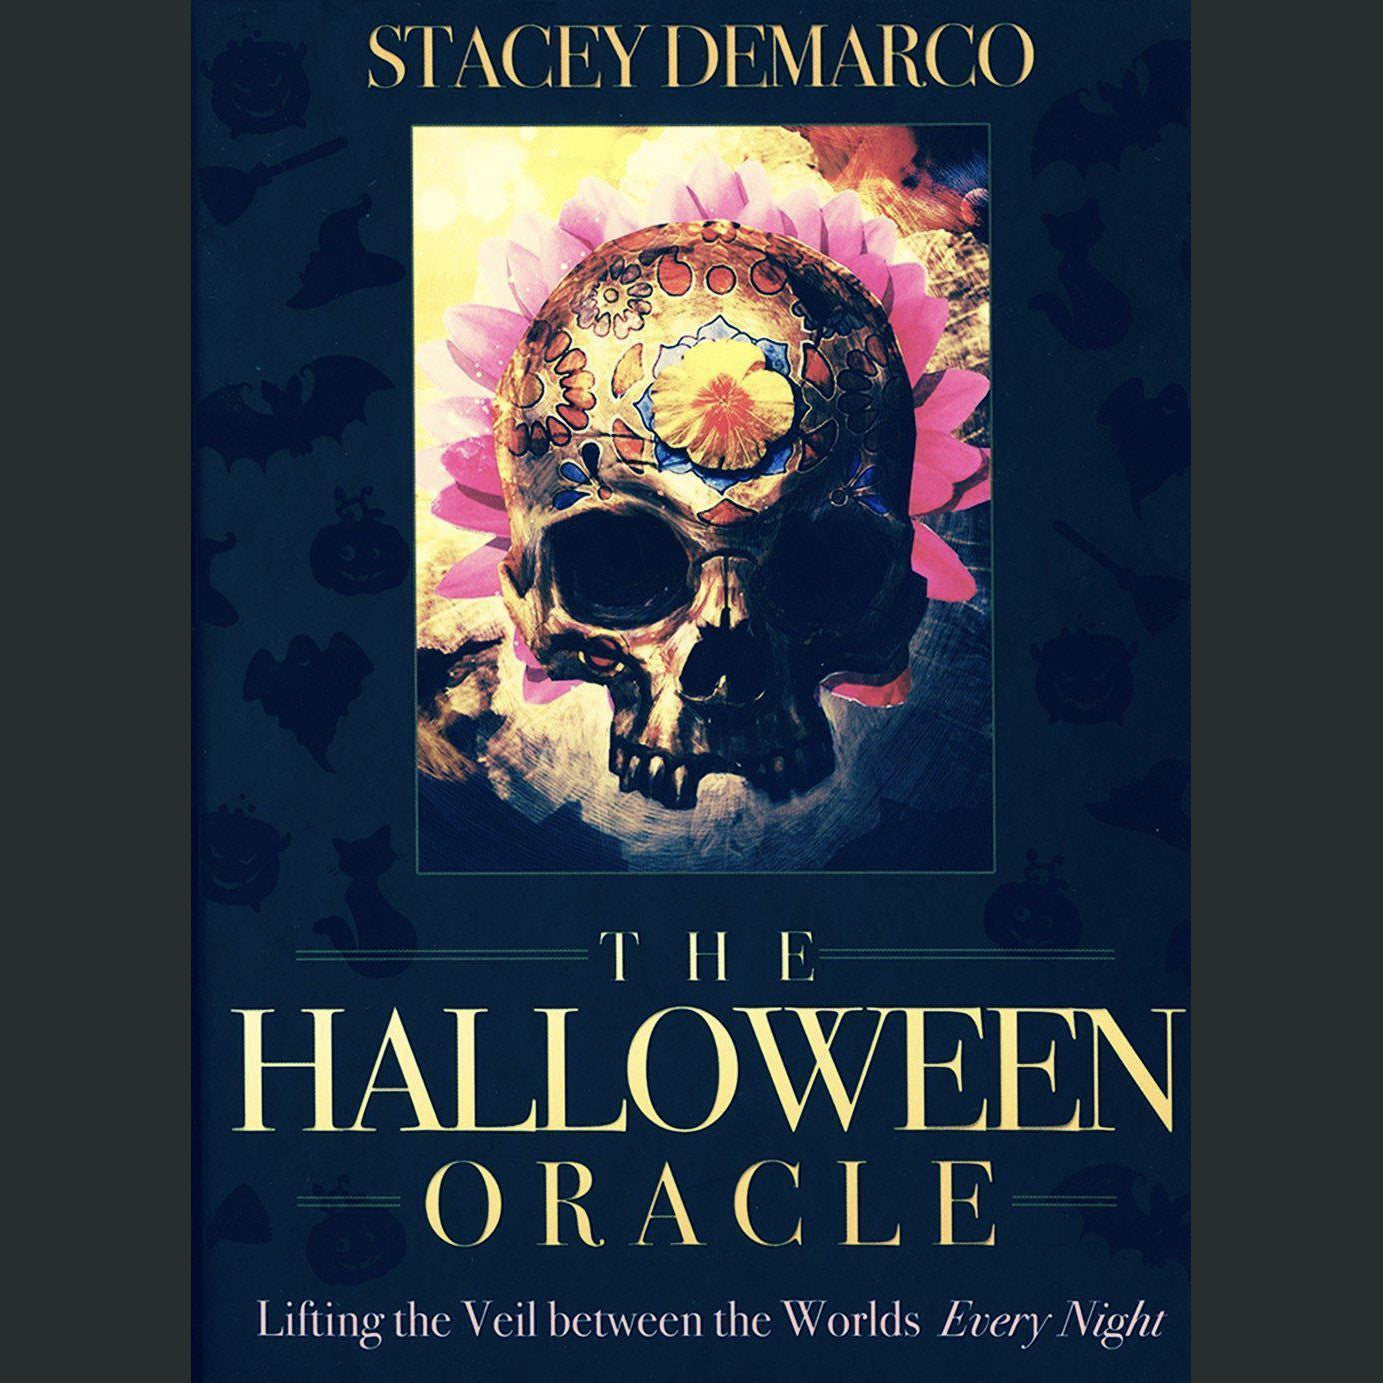 The Halloween Oracle by Stacey Demarco, oracle cards - SugarMuses